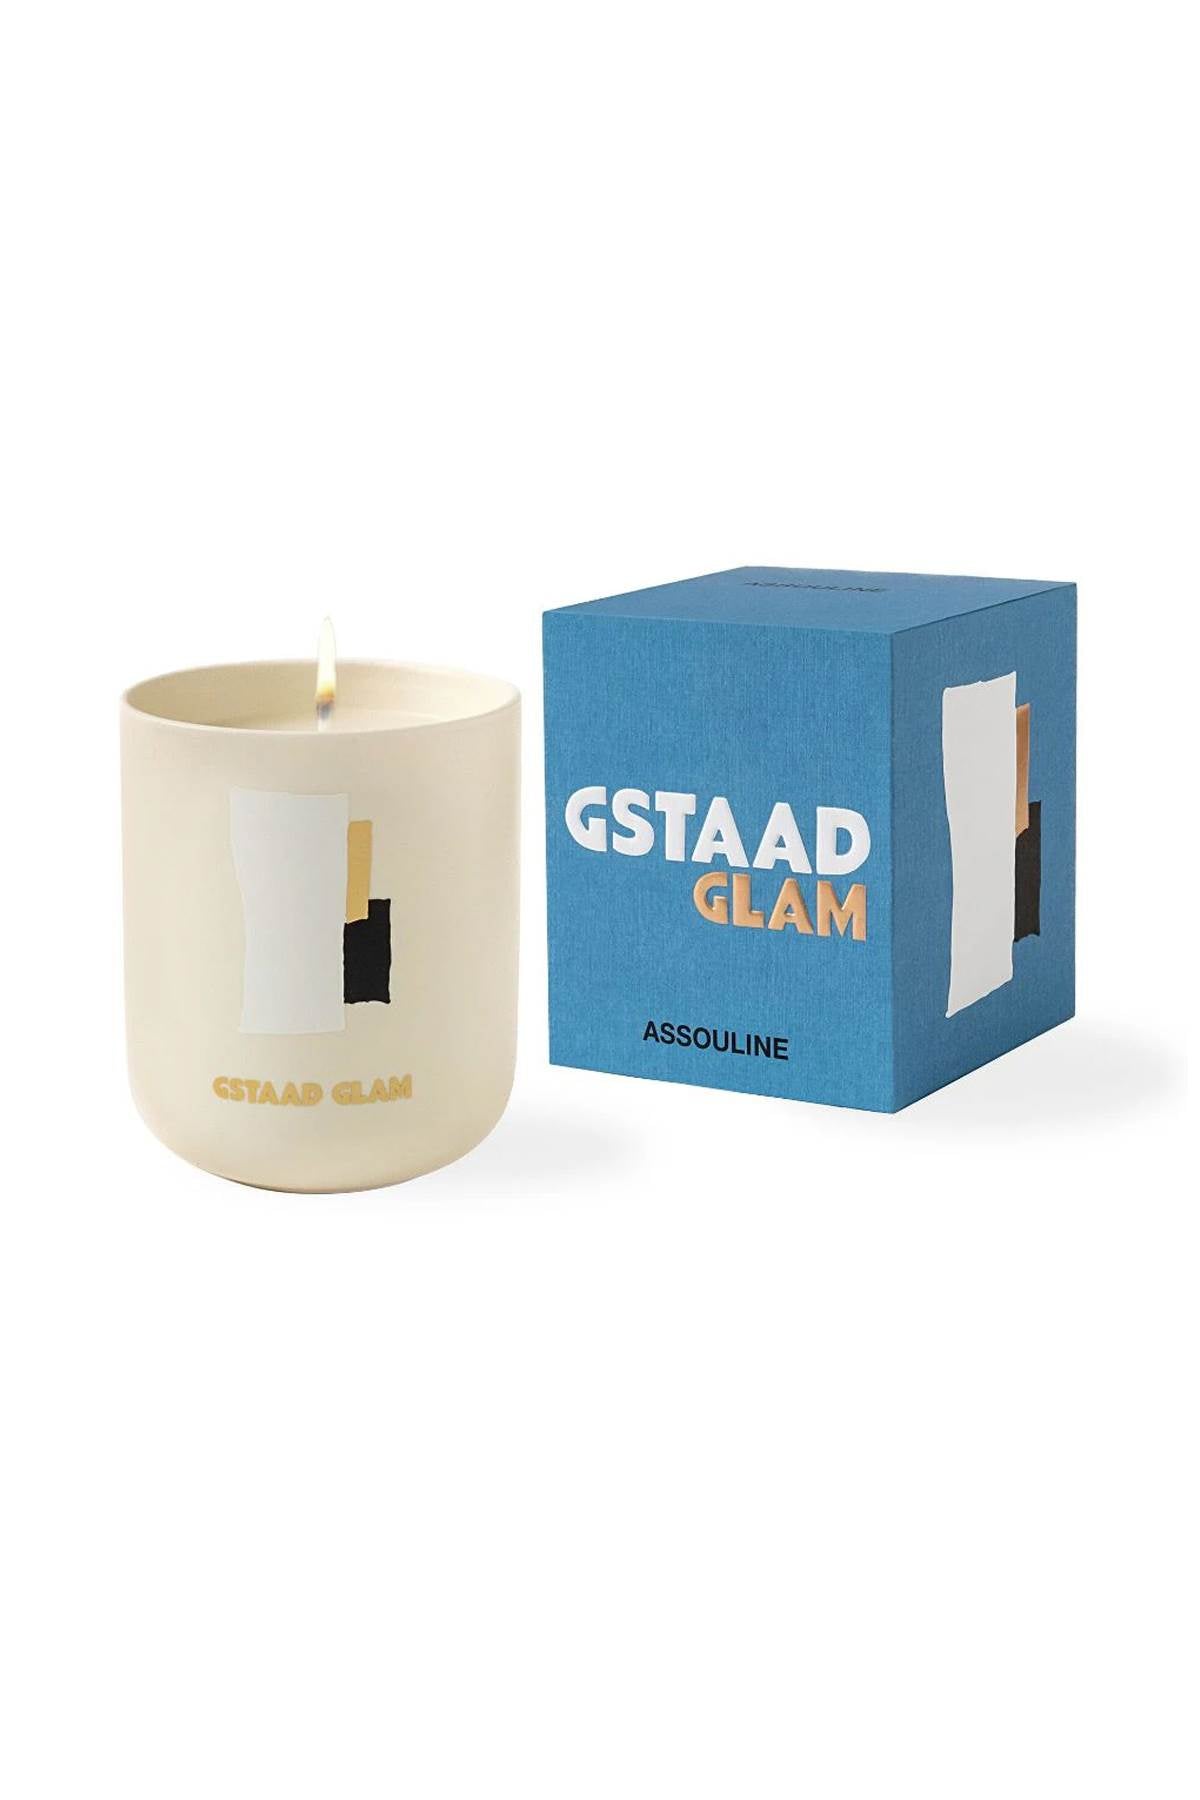 Assouline gstaad glam scented candle-1